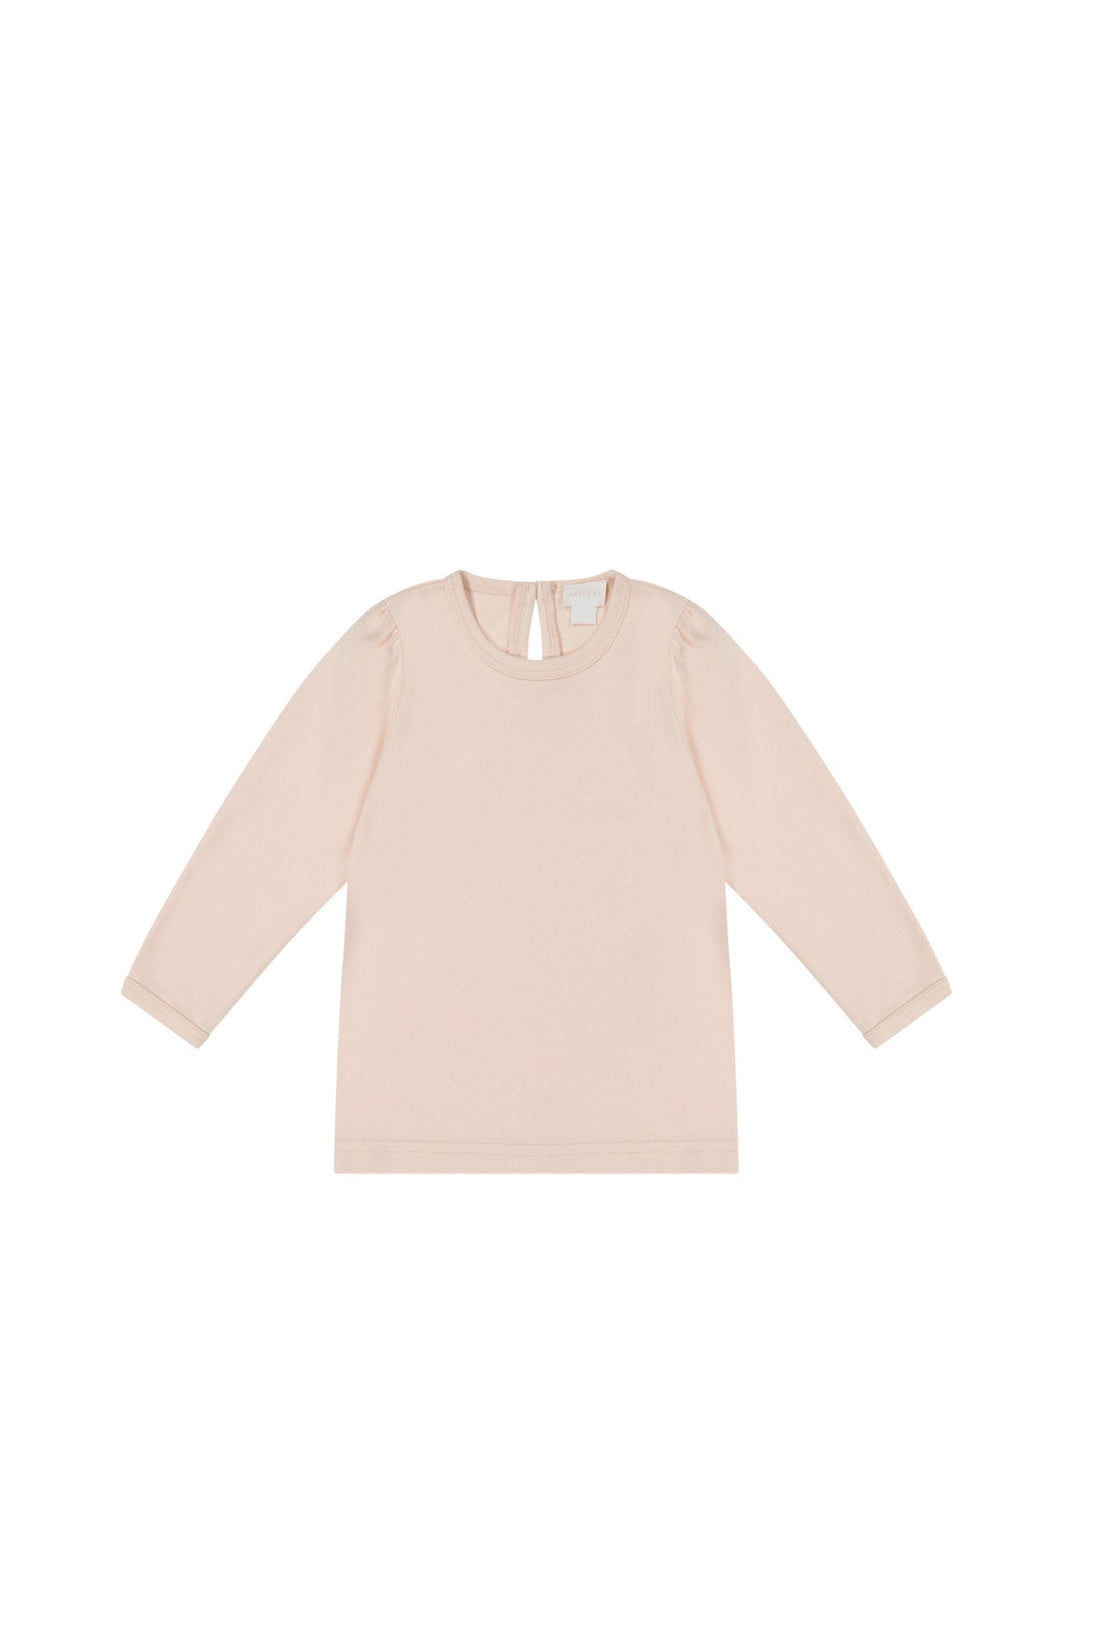 Pima Cotton Cindy Top - Boto Pink Childrens Top from Jamie Kay NZ